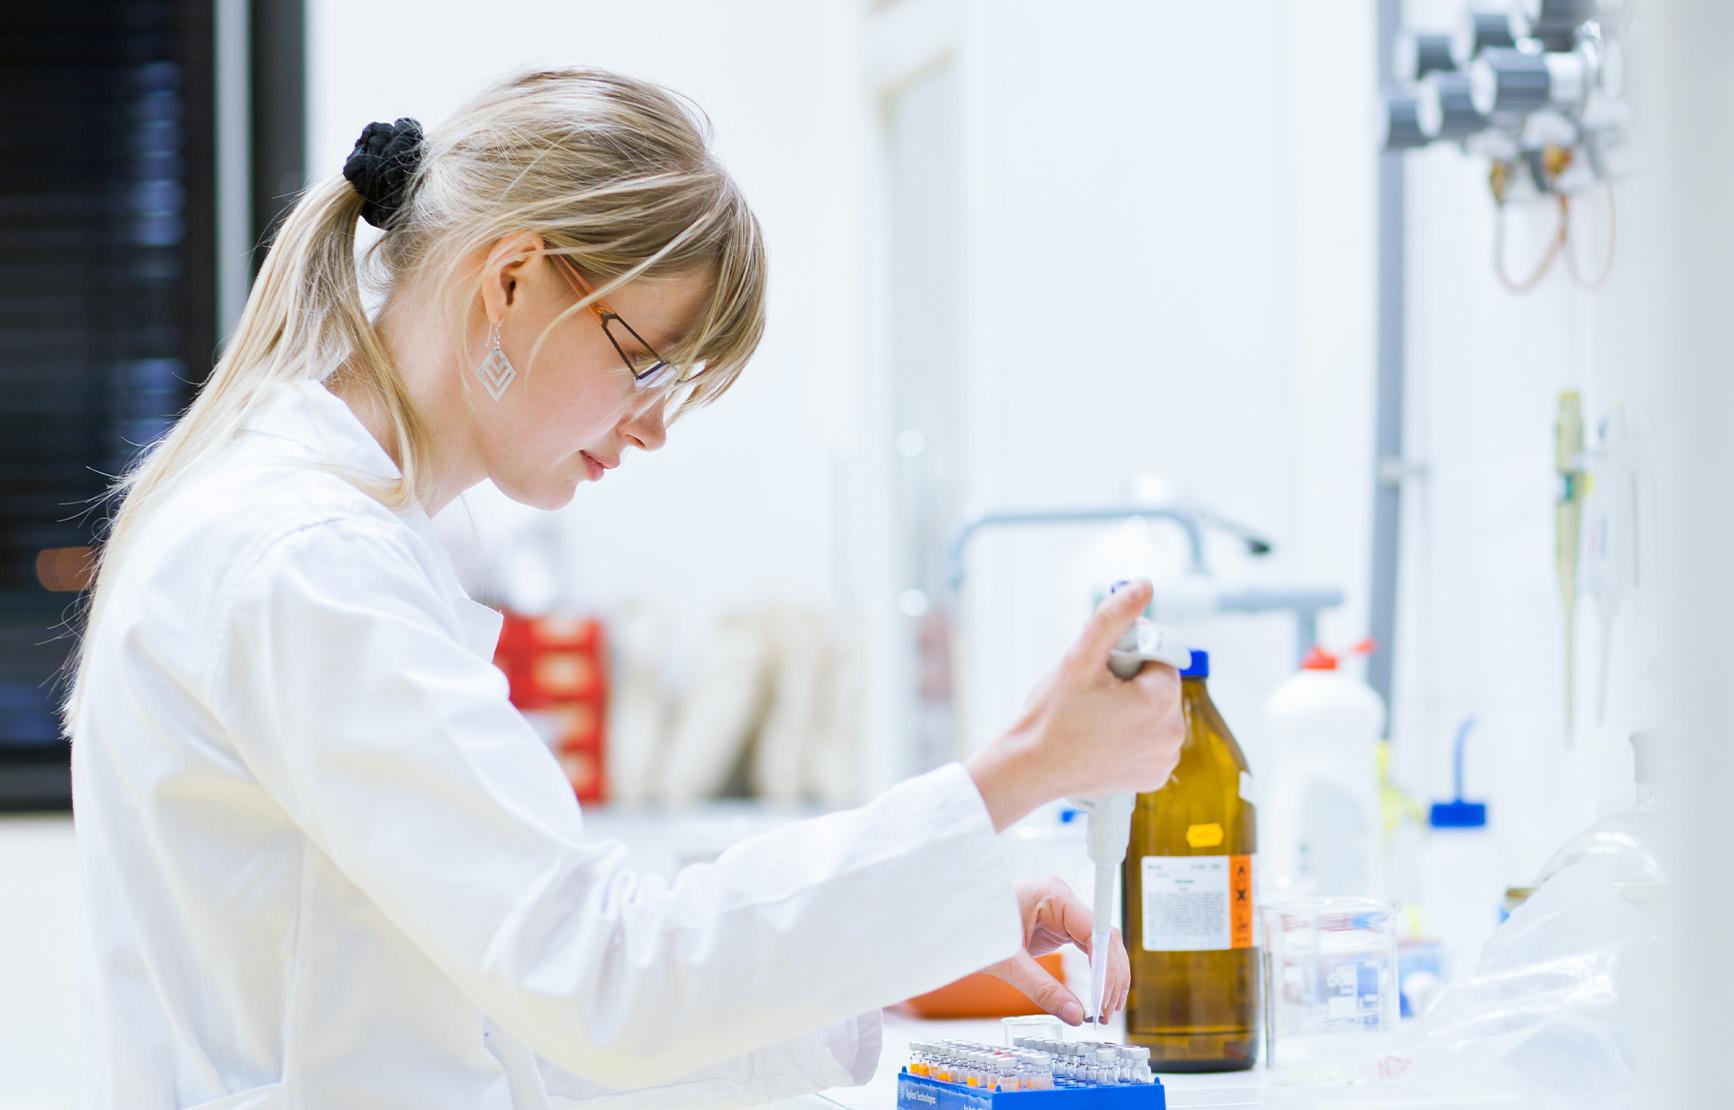 Scientist working with samples in lab